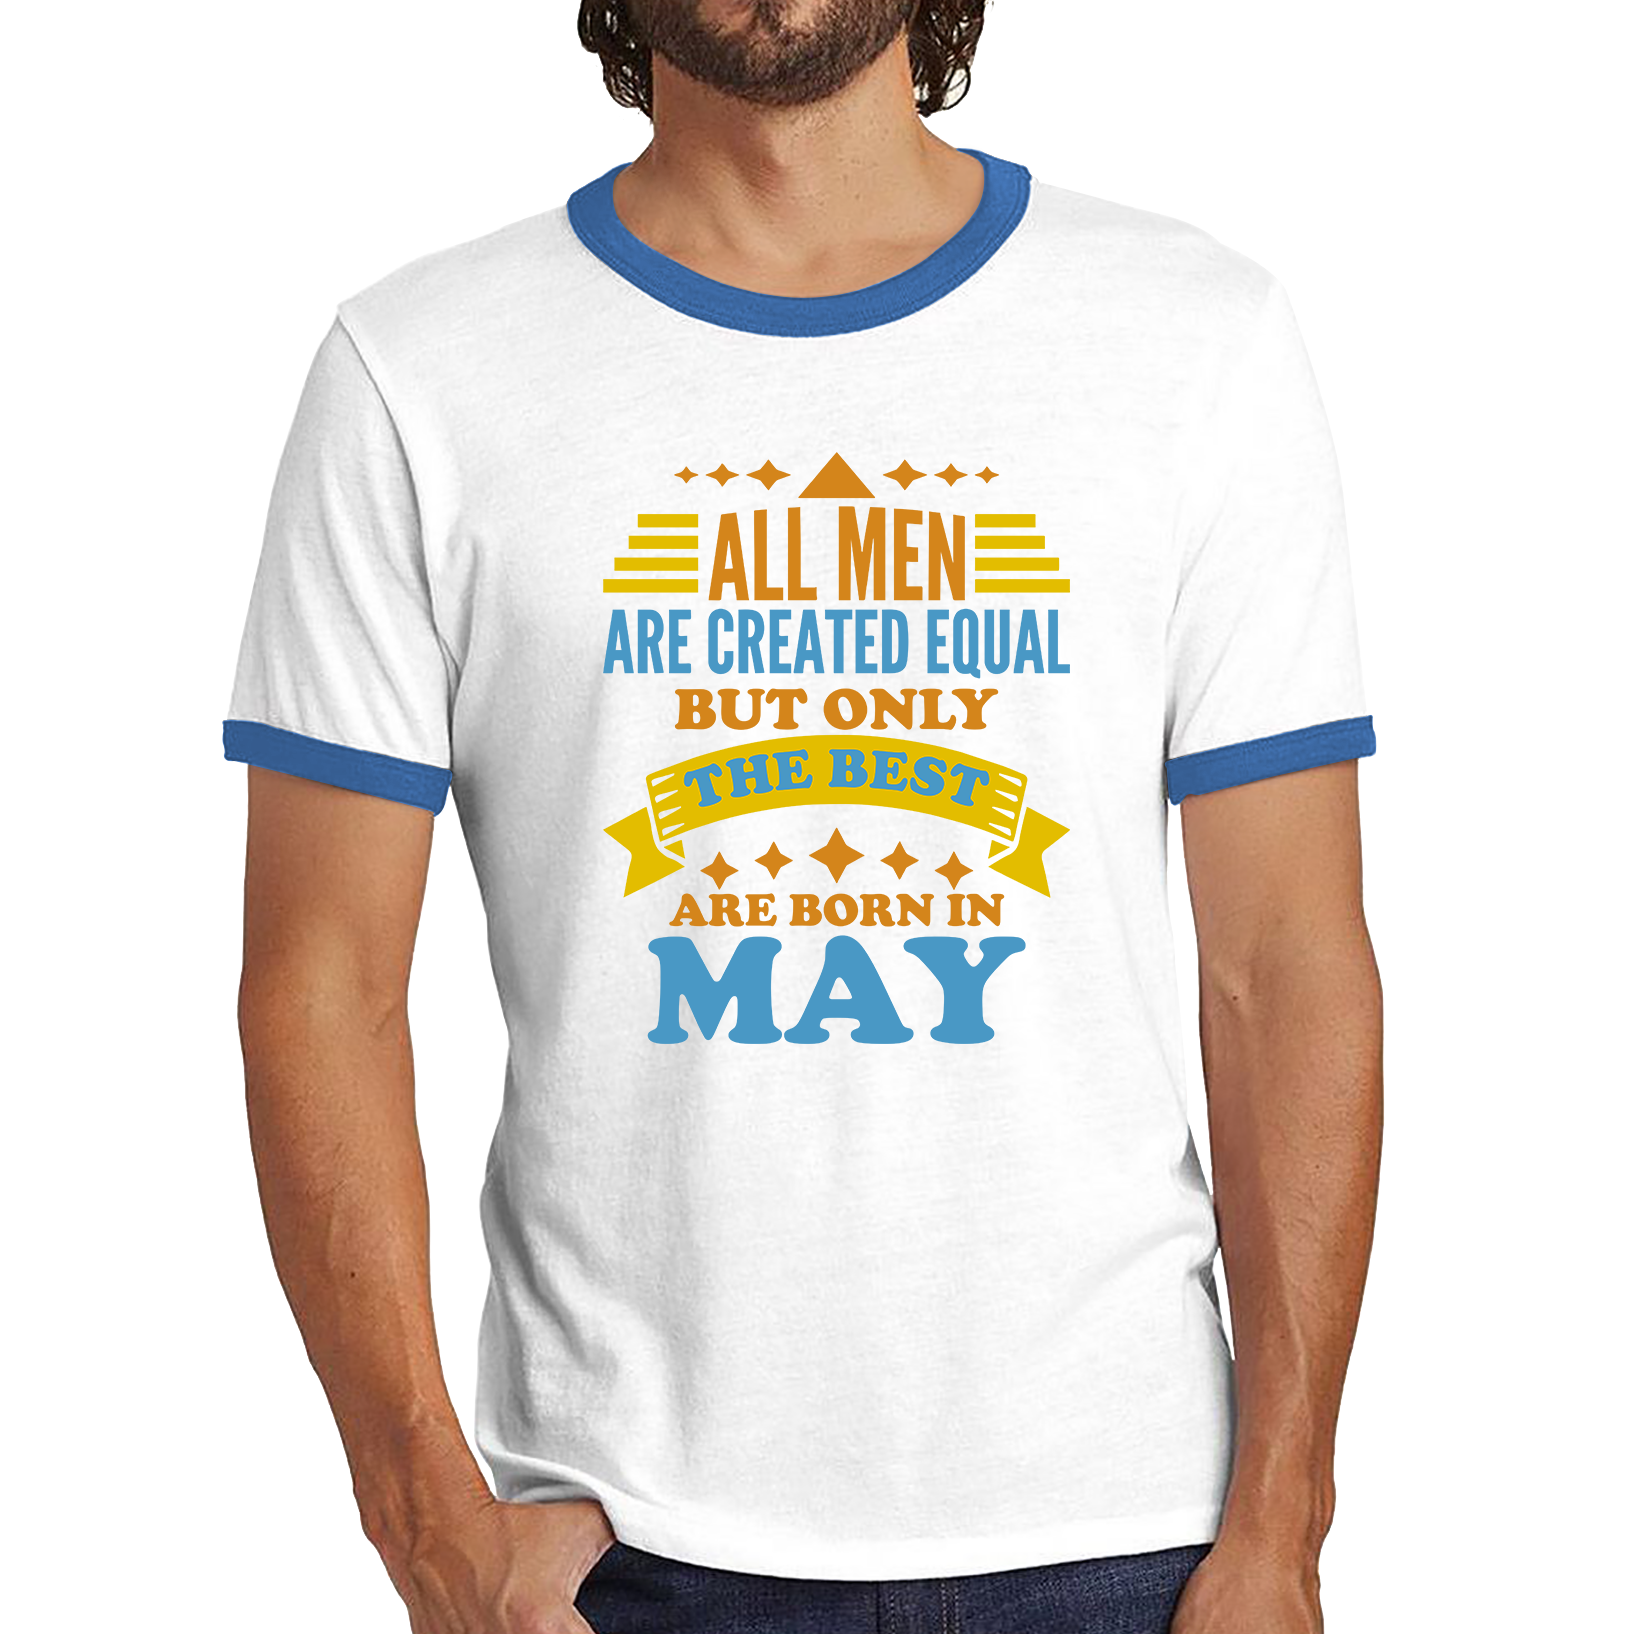 All Men Are Created Equal But Only The Best Are Born In May Funny Birthday Quote Ringer T Shirt